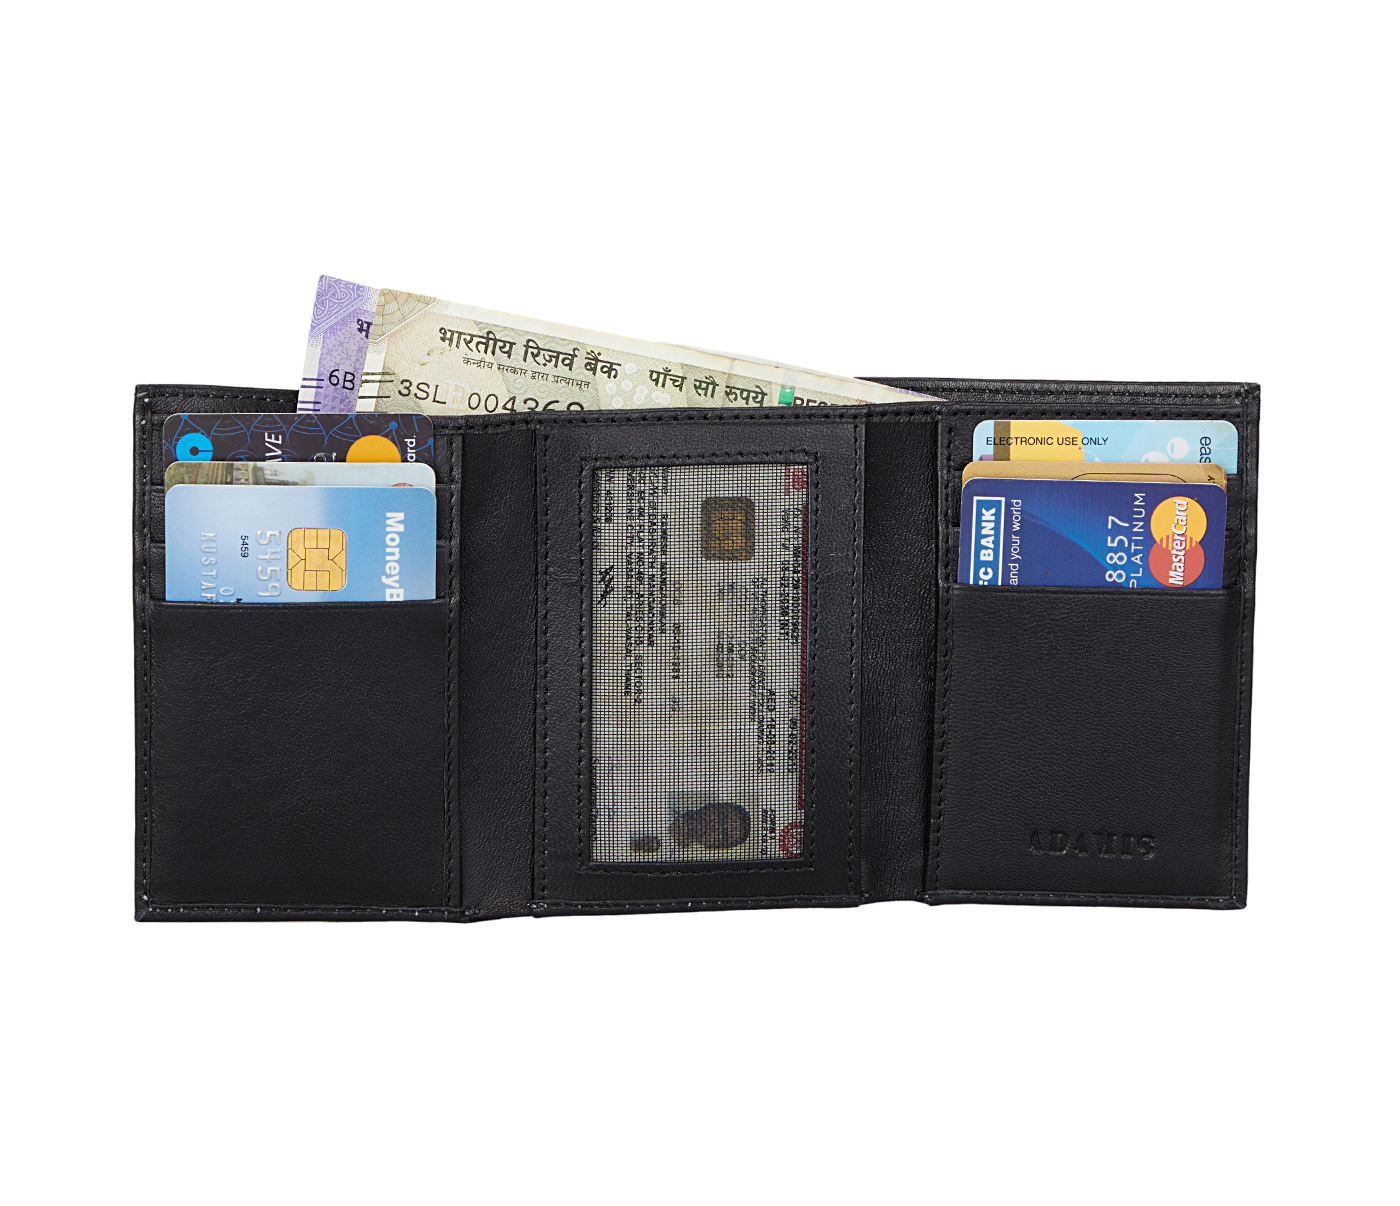 Wallet-Samuel-Mens's trifold wallet with photo id in Genuine Leather - Black